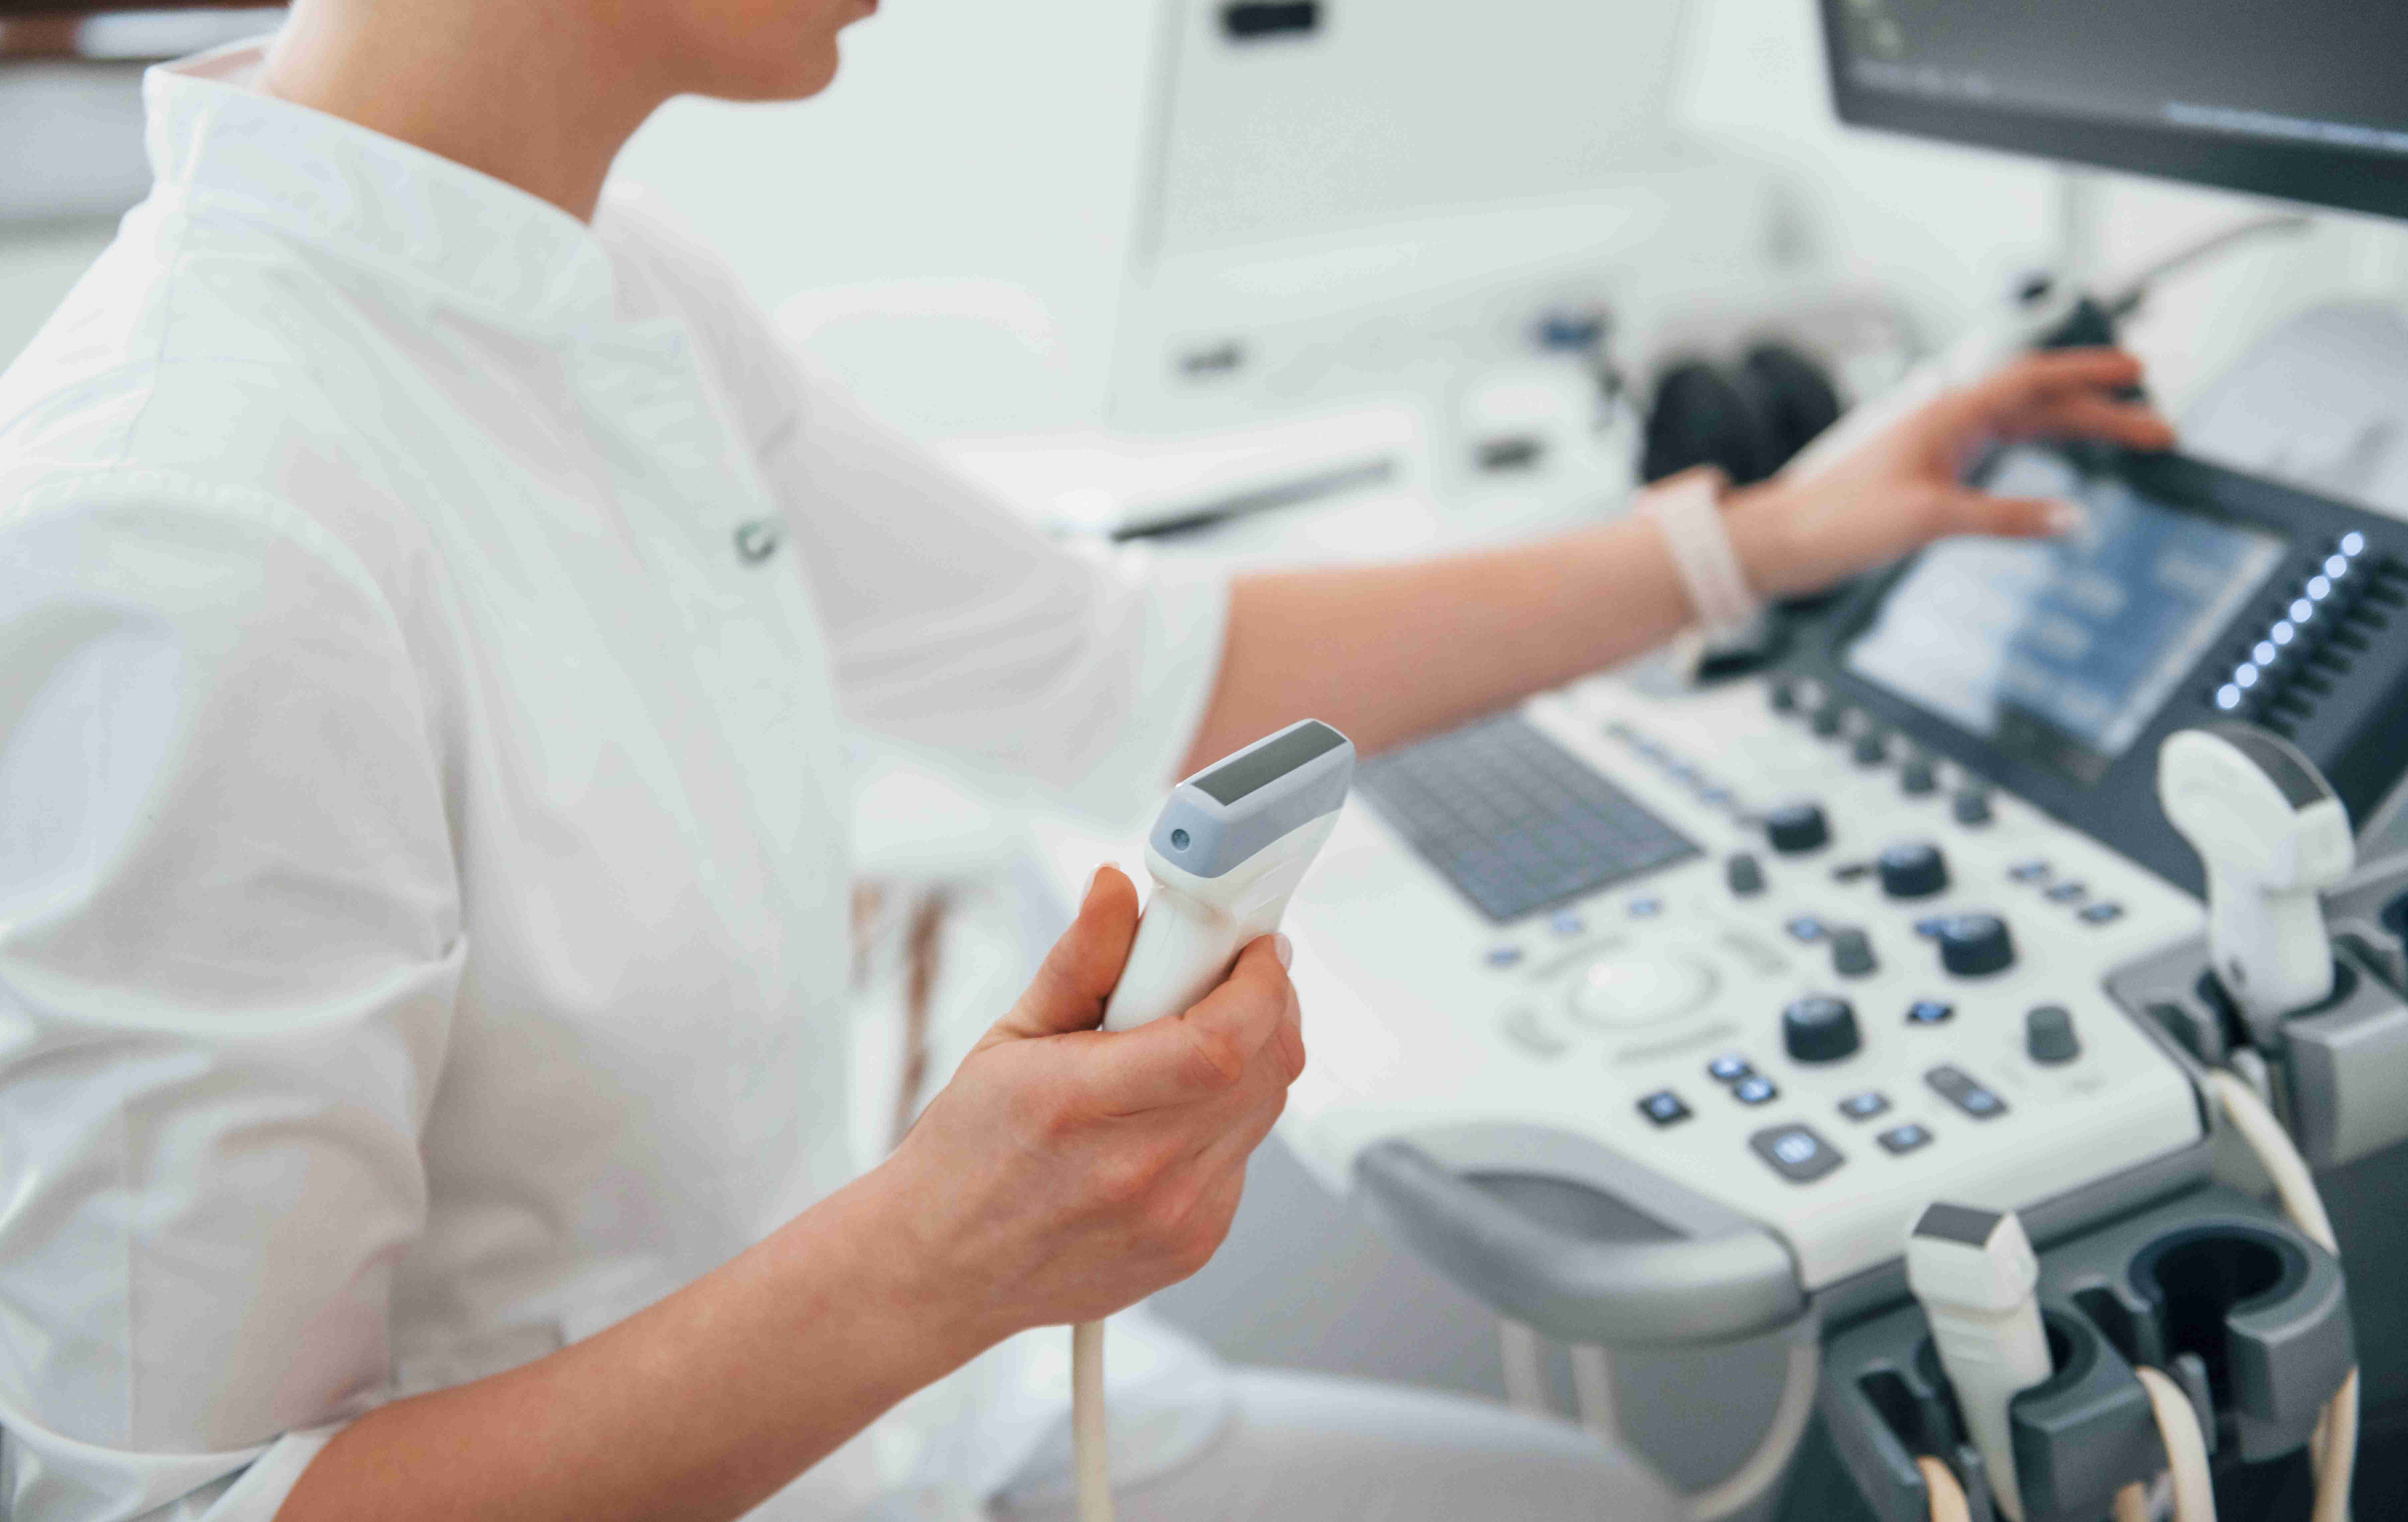 We offer professional ultrasound scanning from our Private GP clinic or even from the comfort of your home! Our Stokenchurch clinic is in easy reach from High Wycombe, Marlow, Oxford and Thame, being just 1 minute off Junction 5 of the M40.